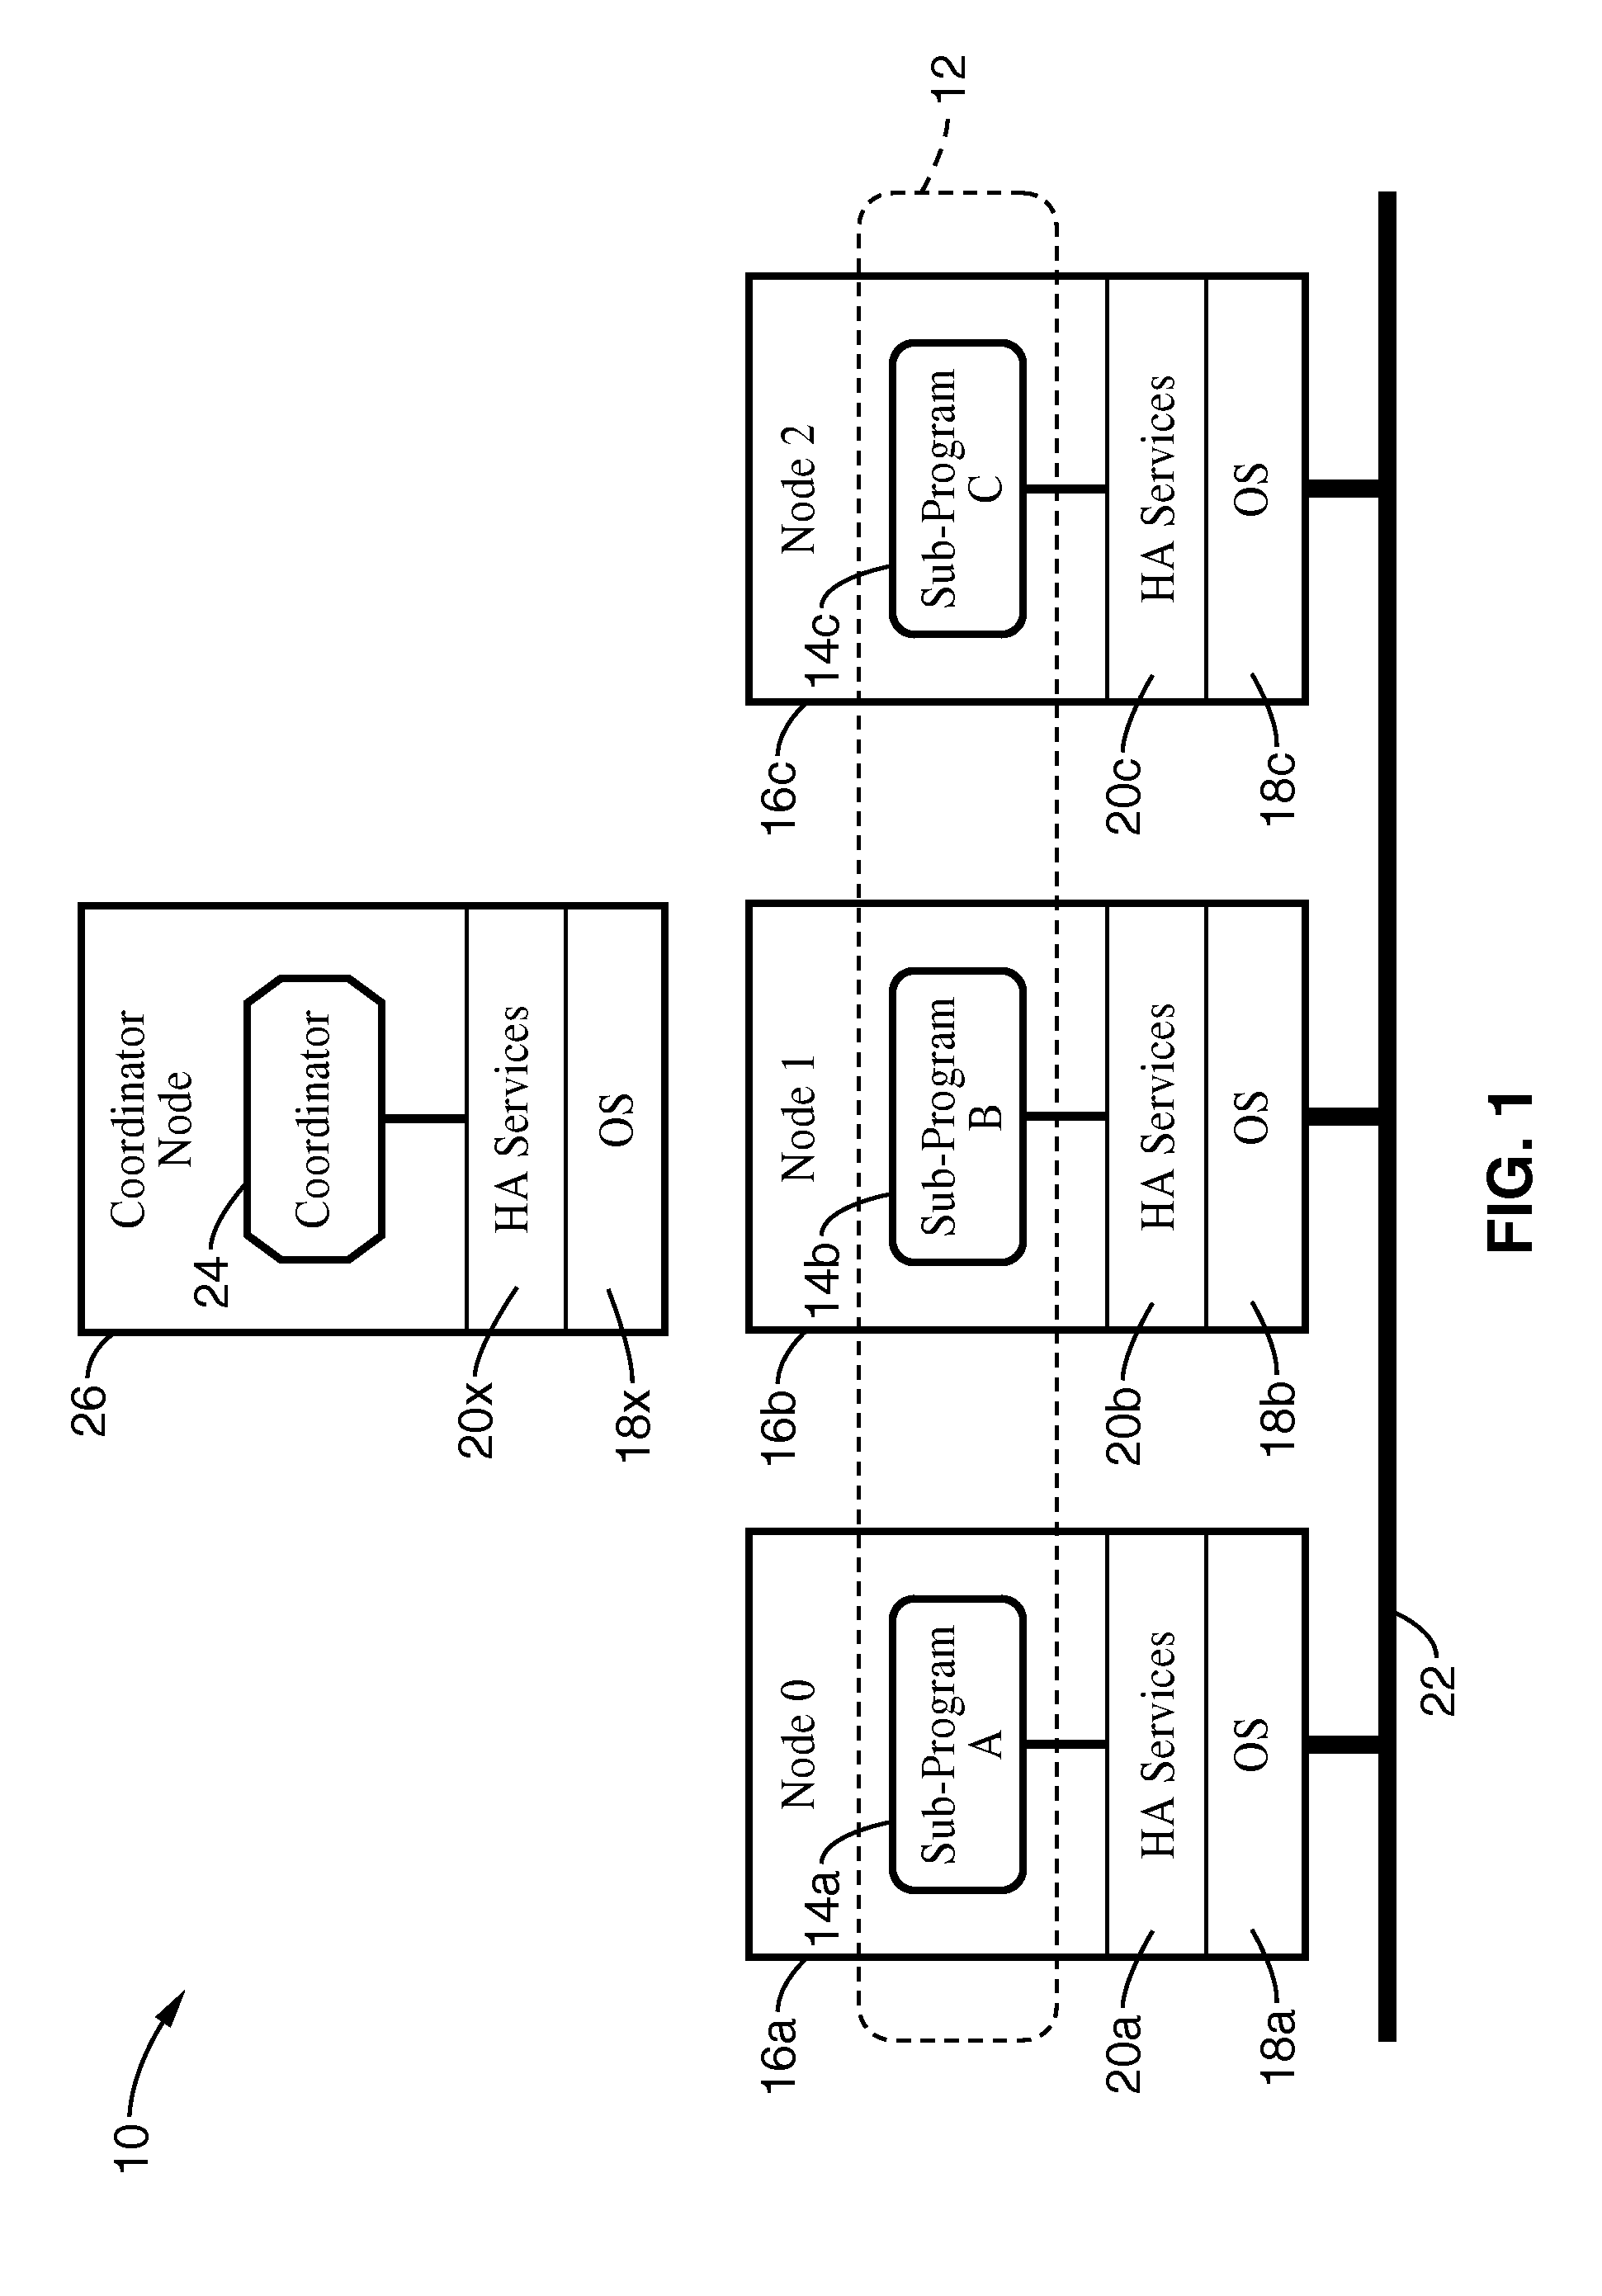 Method and system for providing high availability to distributed computer applications